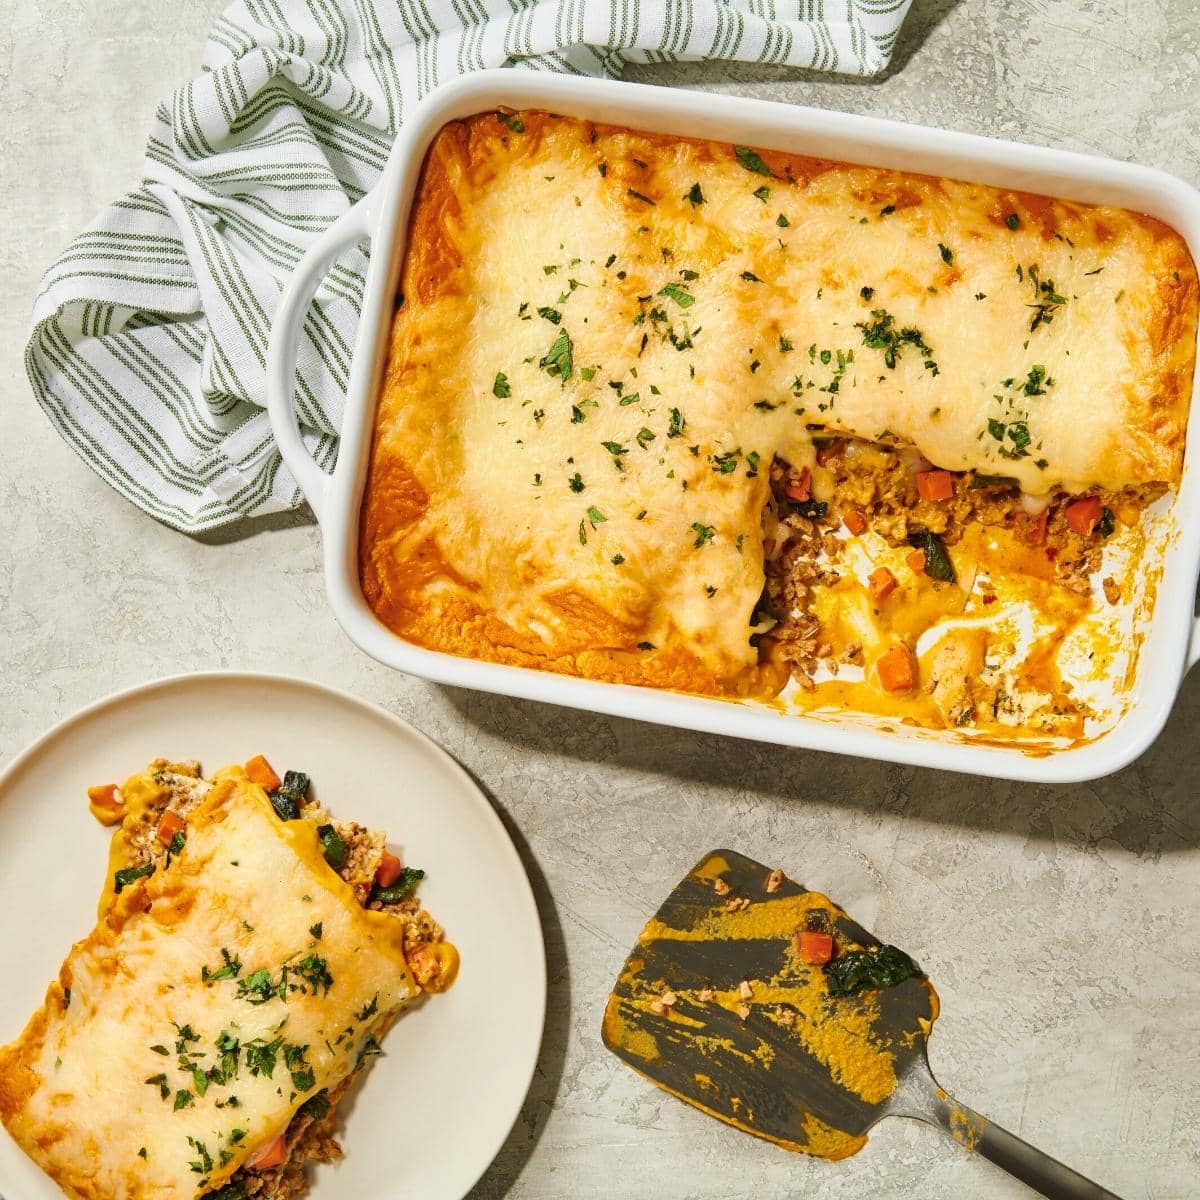 A large casserole dish filled with cheesy lasagna.